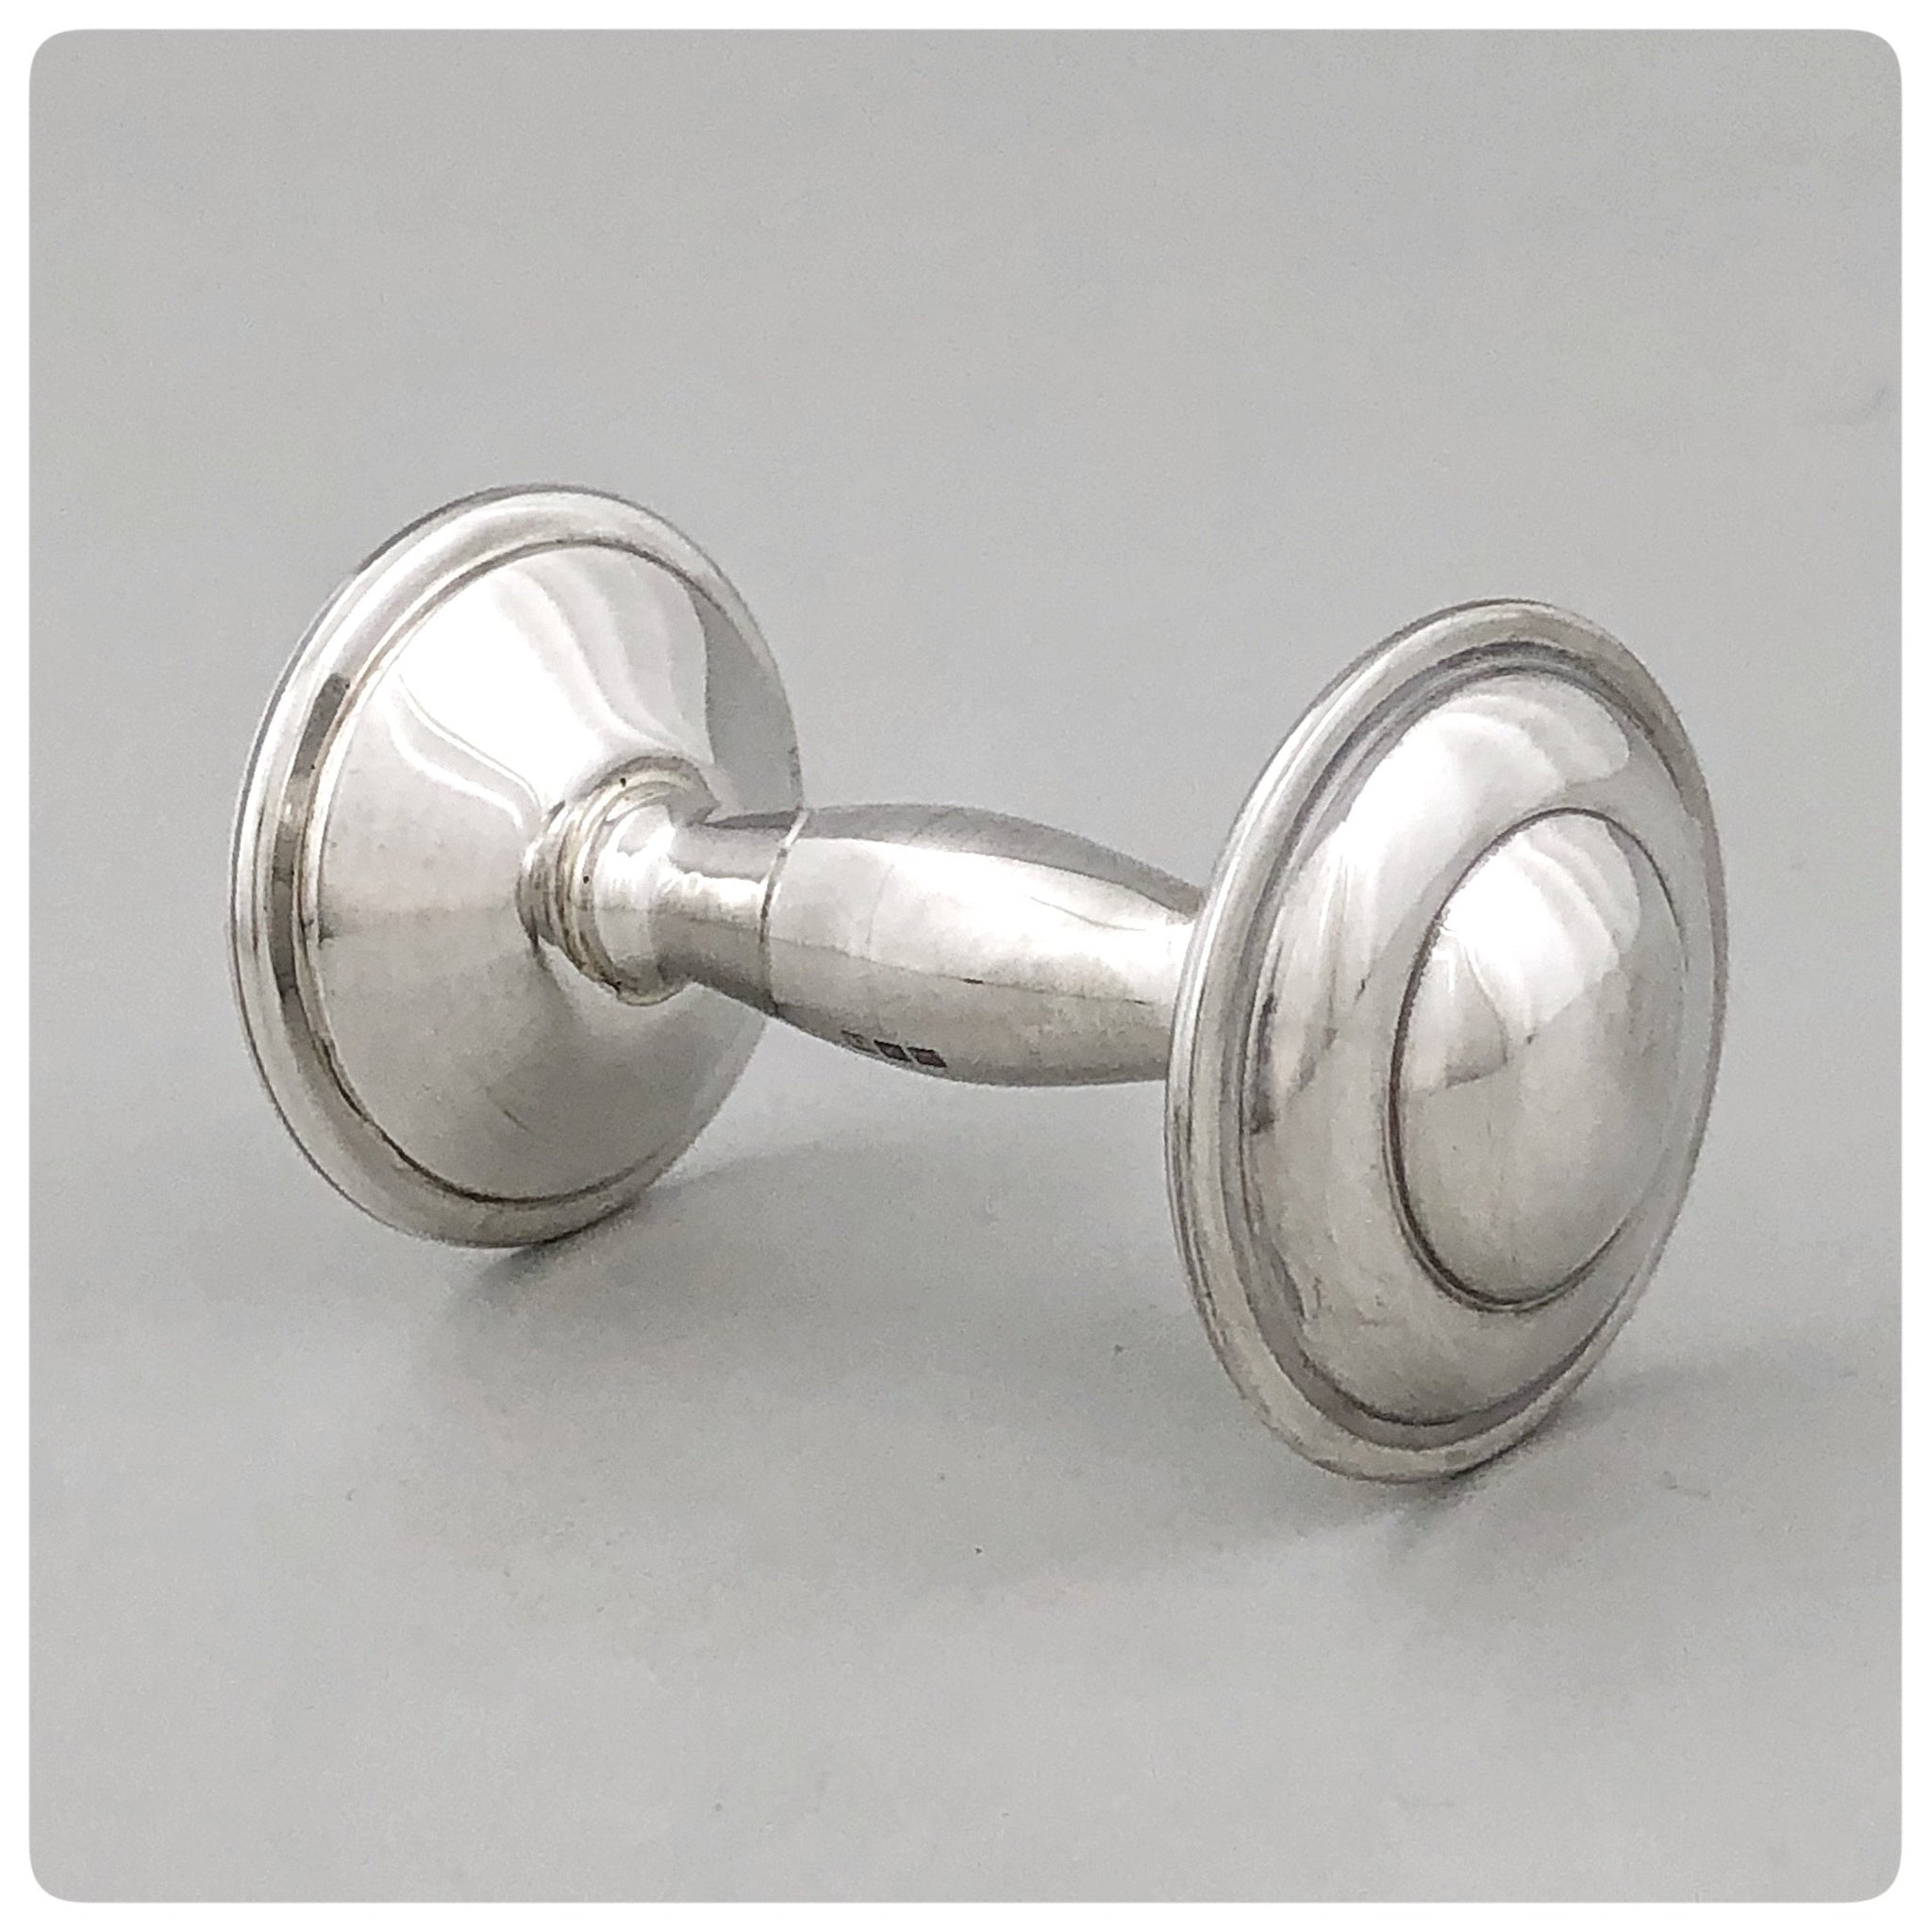 Sterling Silver Dumbbell Rattle, The Prince Company, Pawley's Island, SC, New - The Silver Vault of Charleston